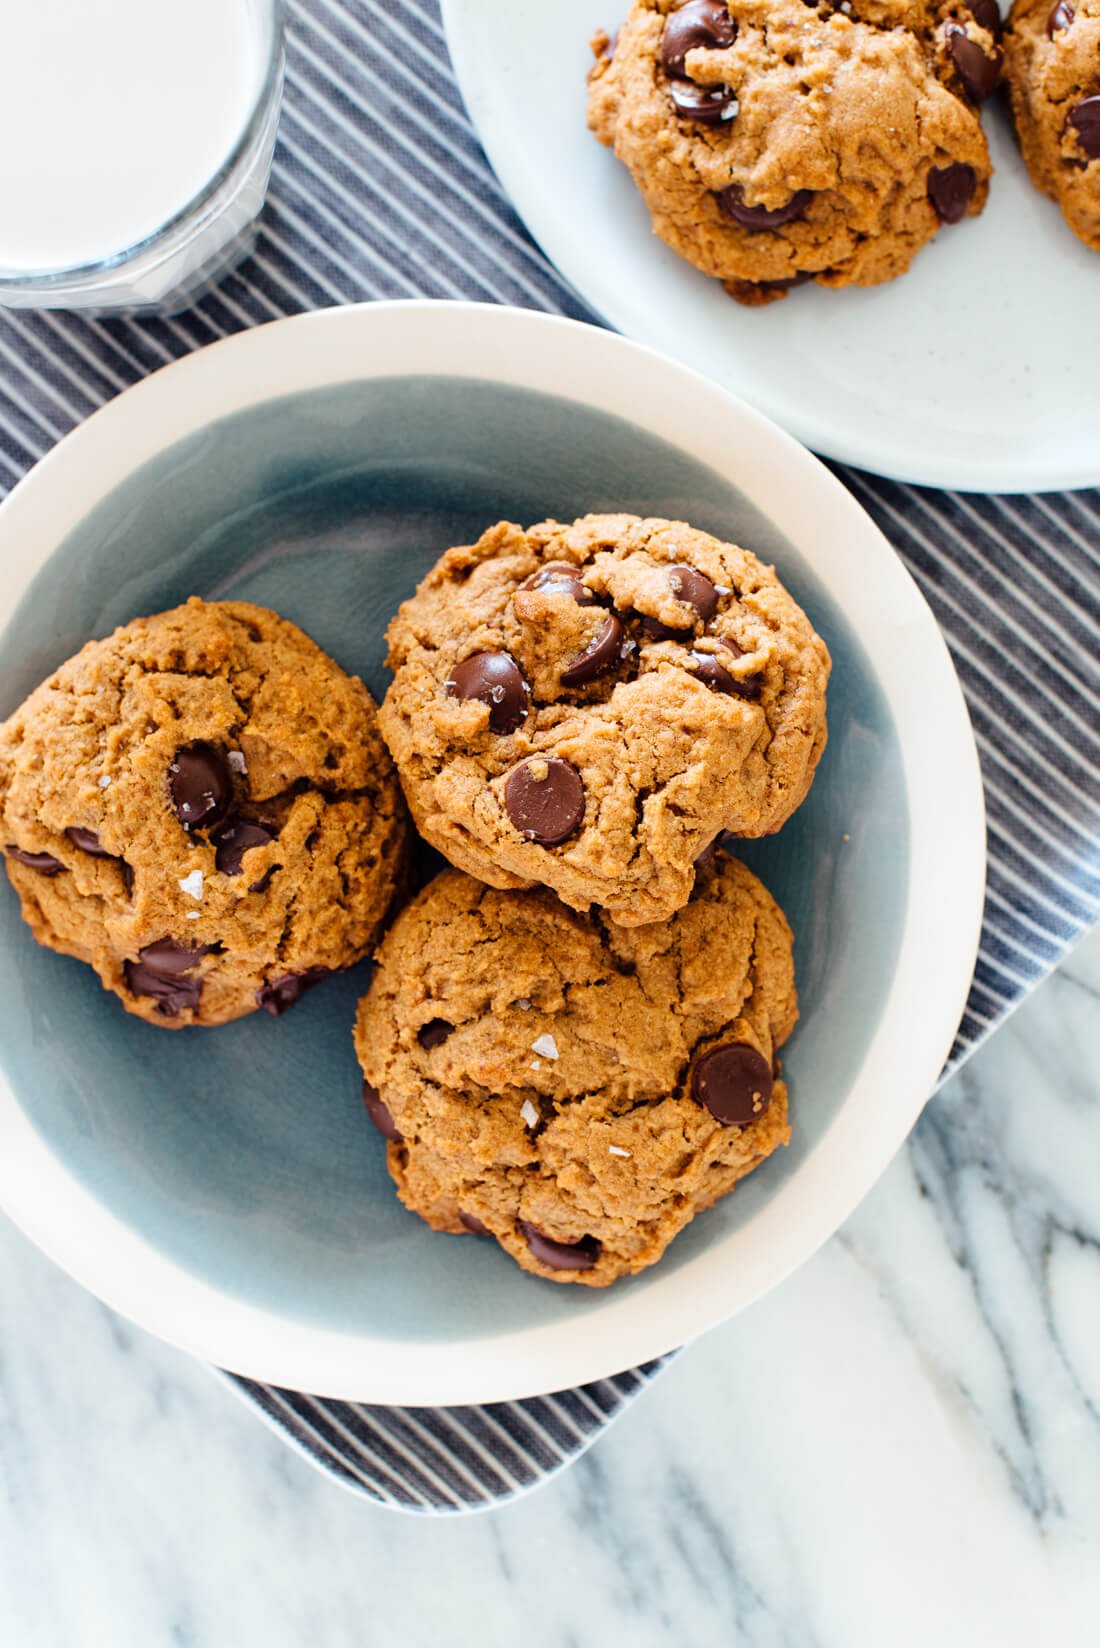 The most amazing chocolate chip cookies recipe (easy to make, no mixer required, and no butter or eggs, either!)